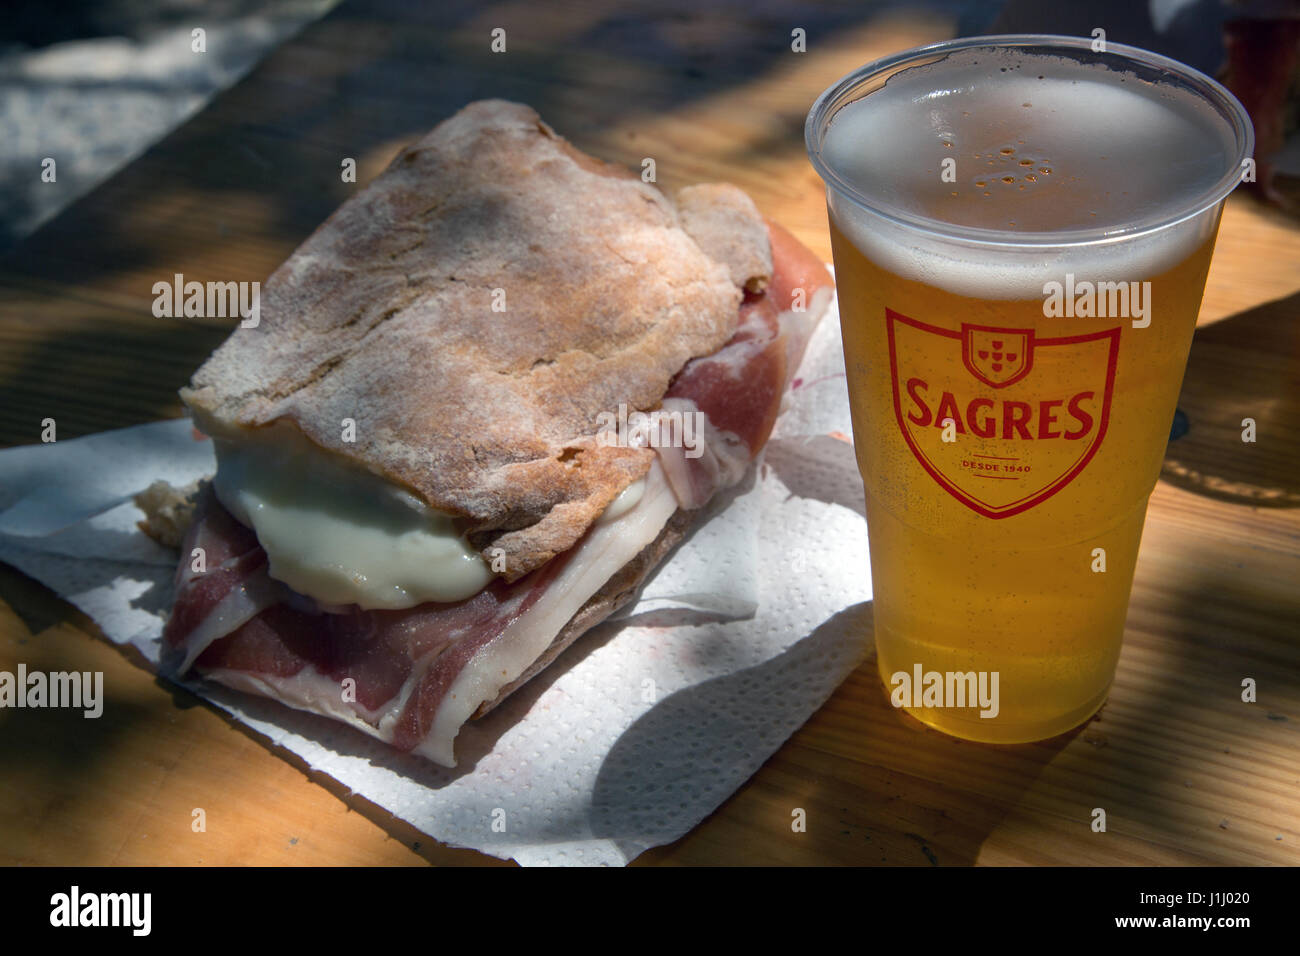 A ham and cheese sandwich and a Sagres larger drink. Stock Photo